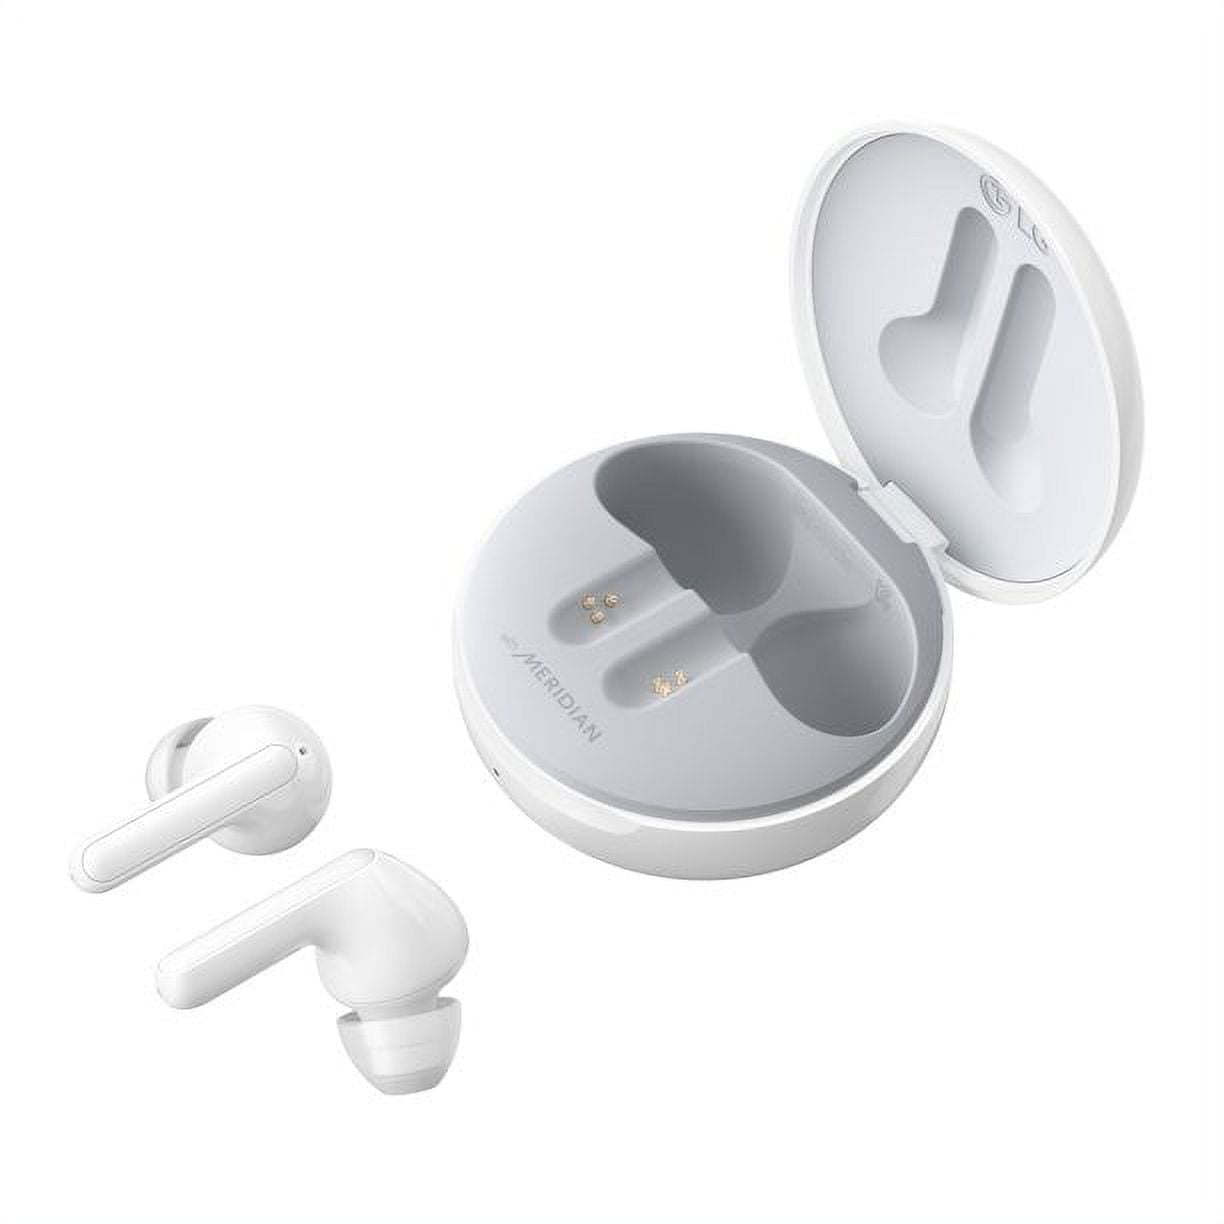 LG Tone Free FN7 Active Noise Cancellation Bluetooth Earbuds, White